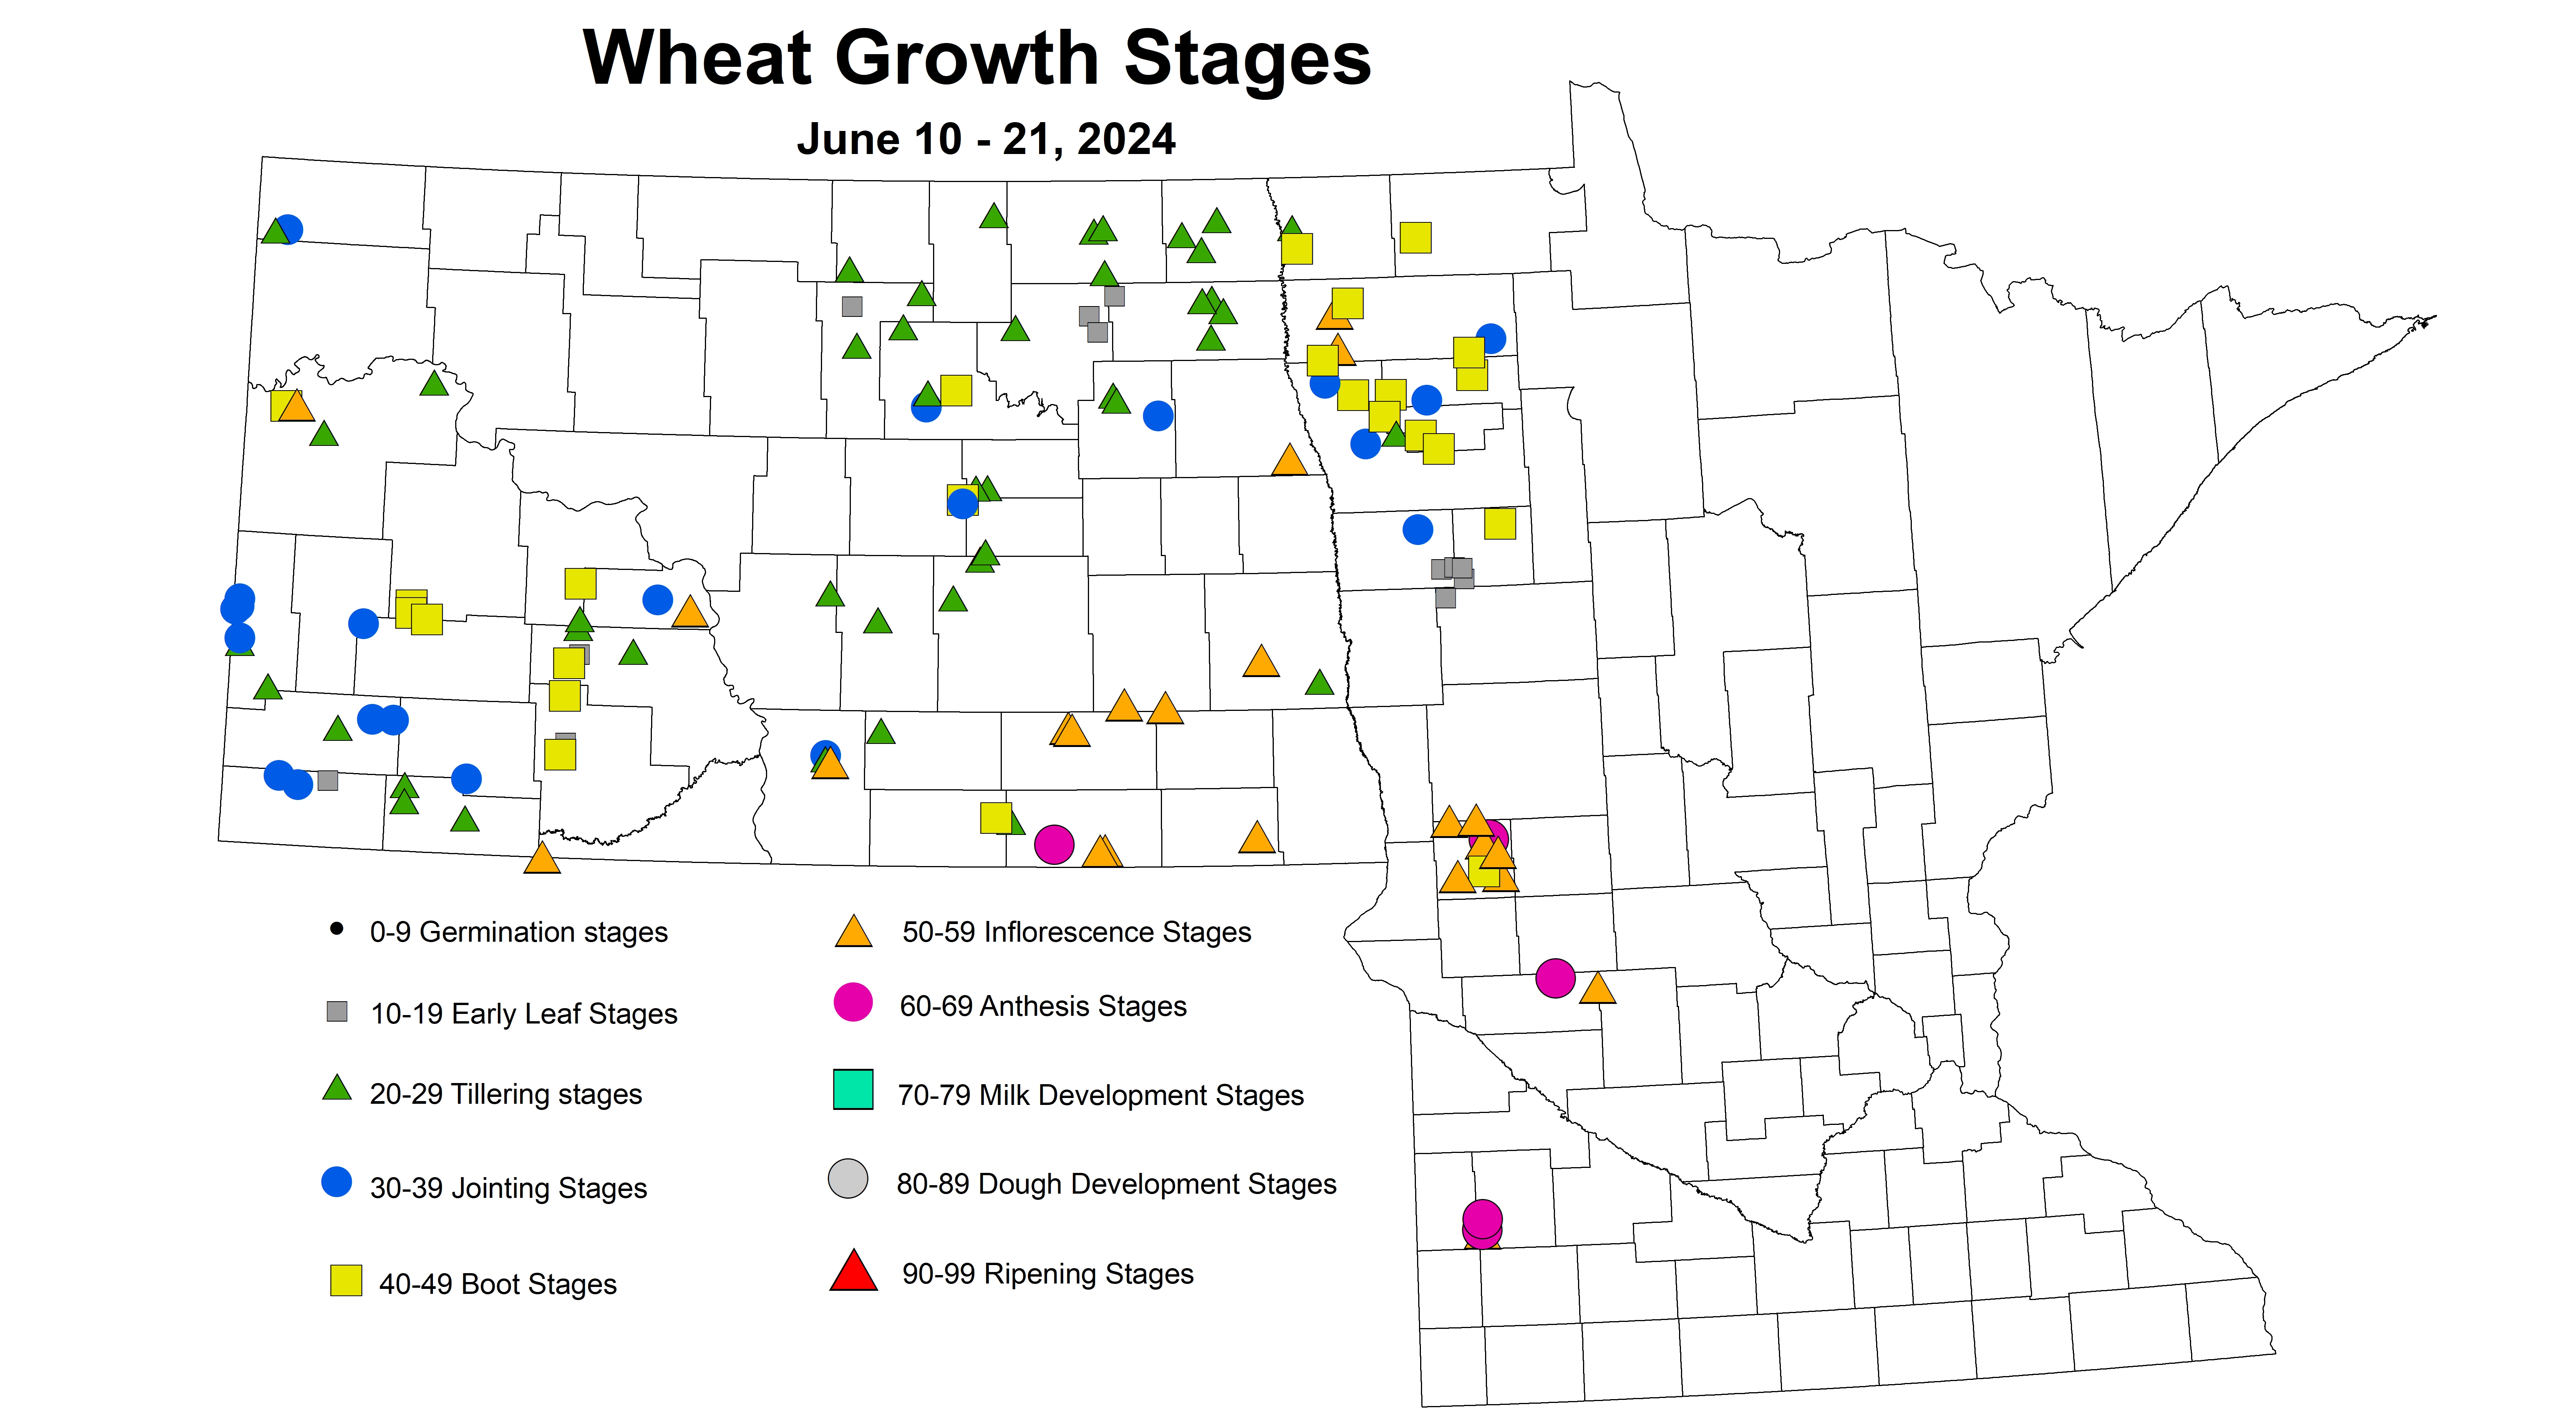 wheat growth stages 2024 6.10-6.21